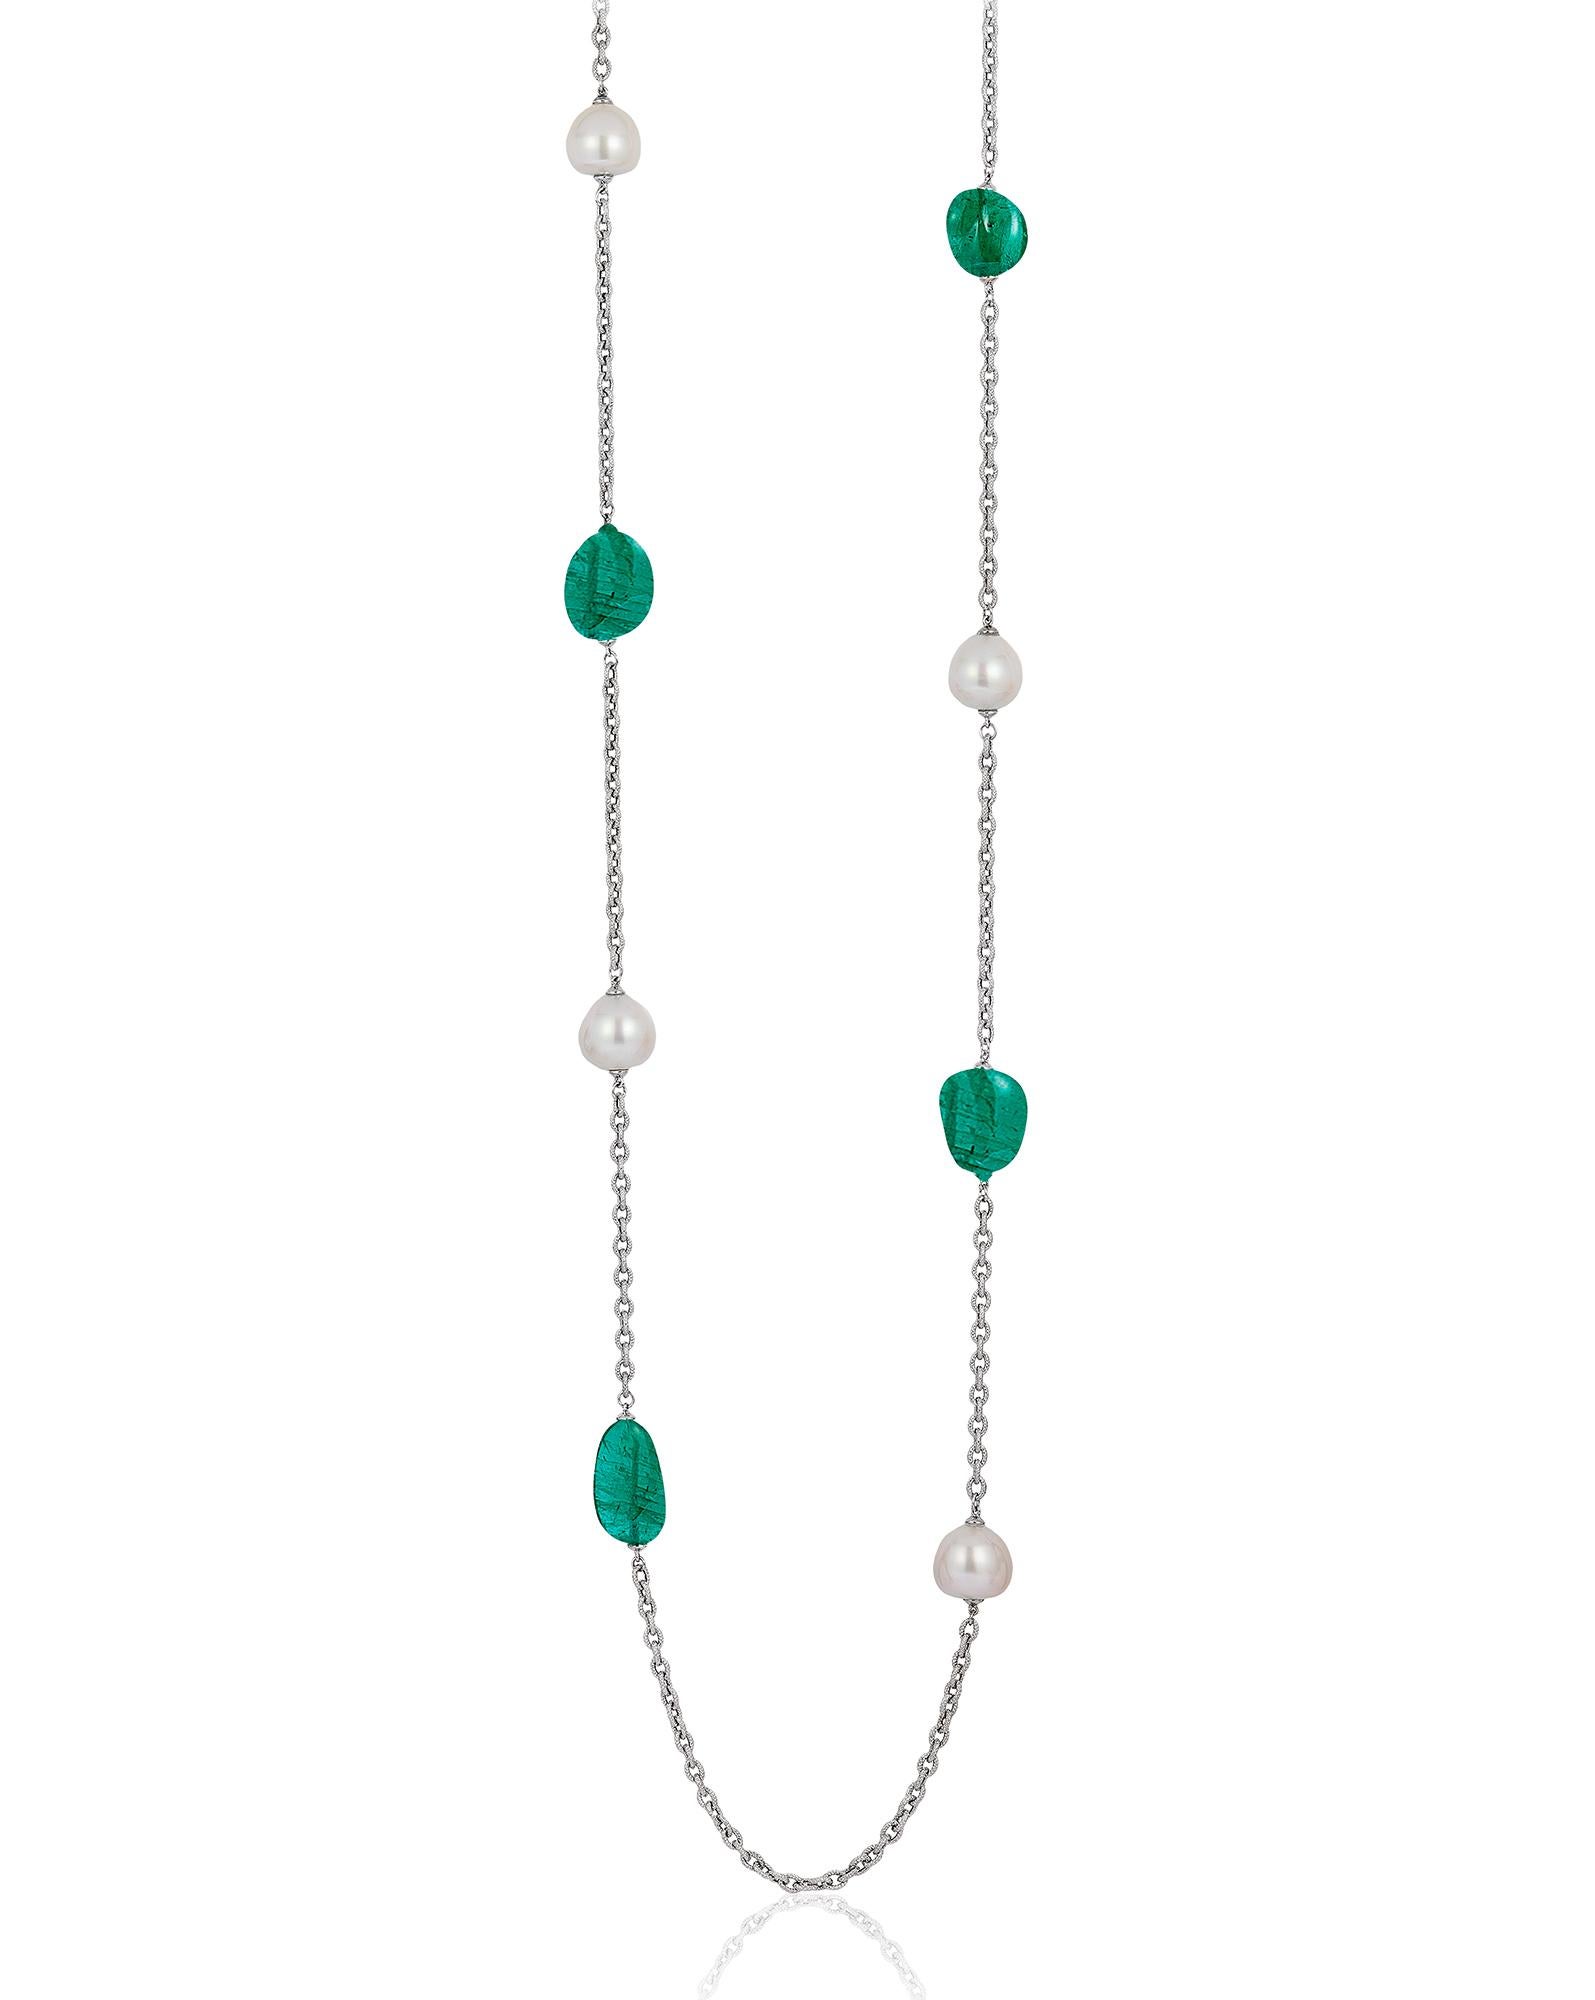 Emerald Tumble with White South Sea Pearl Drop Necklace in 18K White Gold, from 'G-One' Collection 

Length: 36